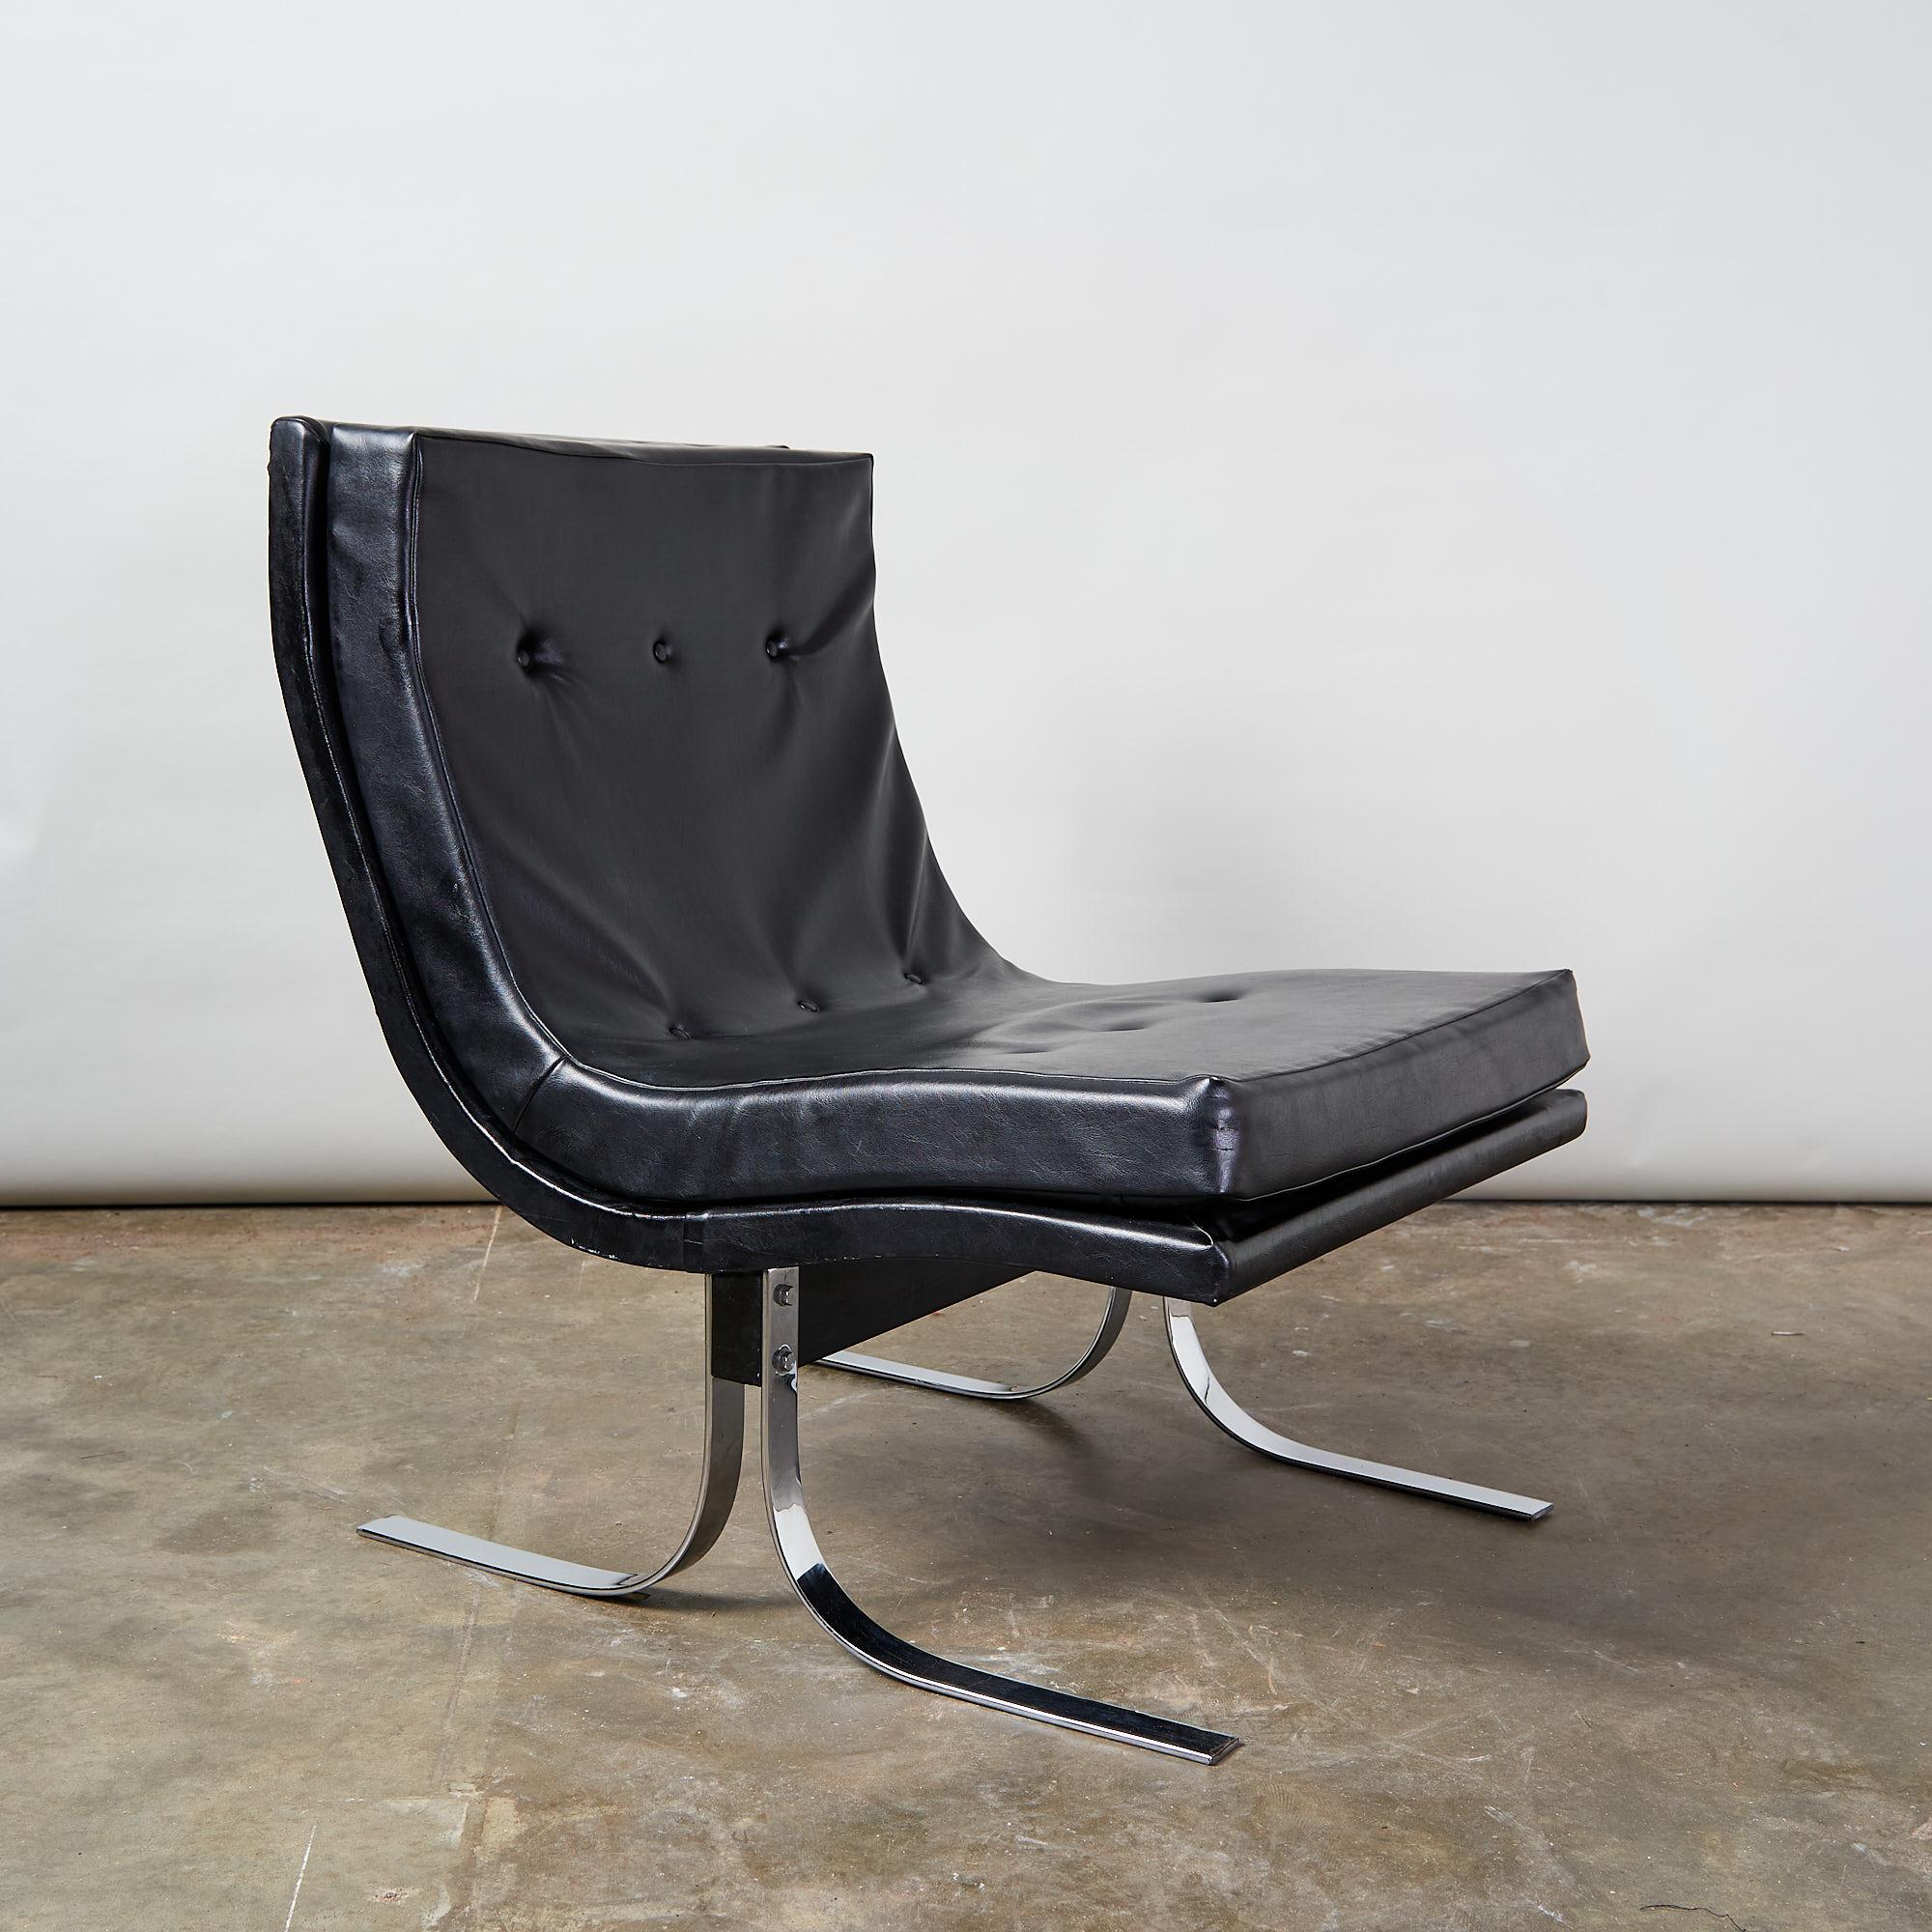 A 1970s leatherette lounge chair with chrome feet.